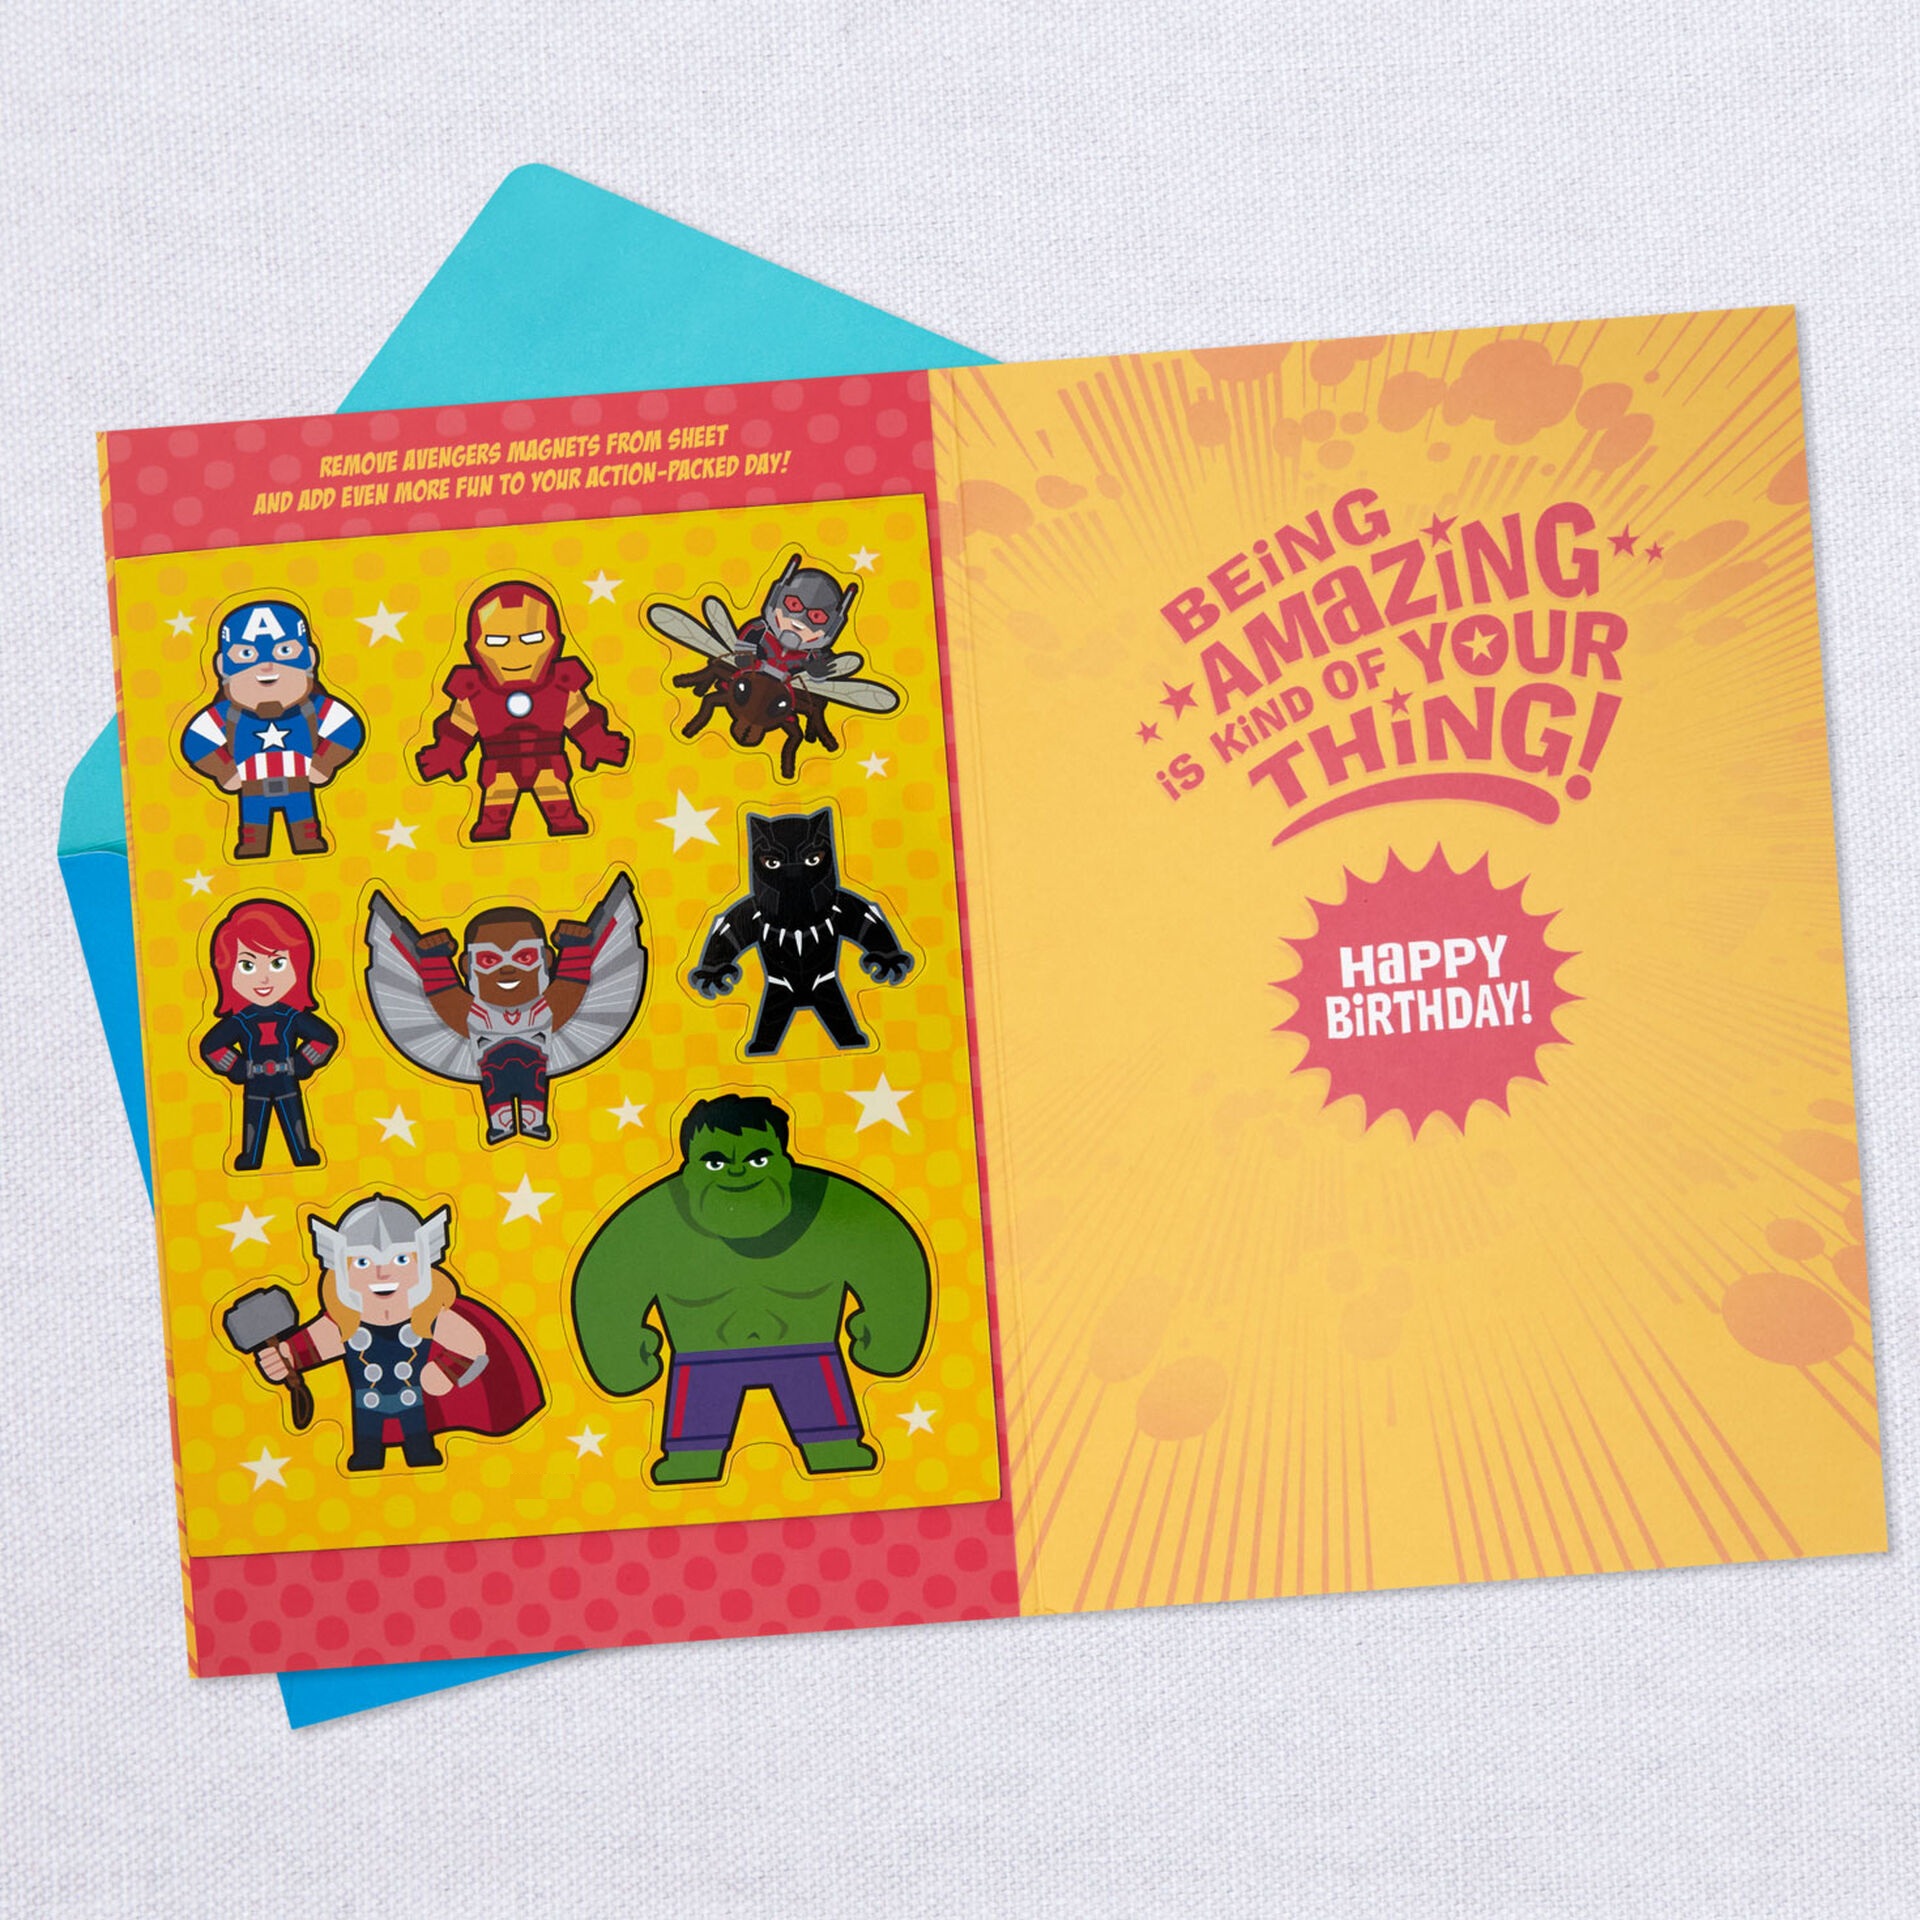 Marvel-Avengers-Kids-4th-Birthday-Card-With-Magnets_559HKB5263_03